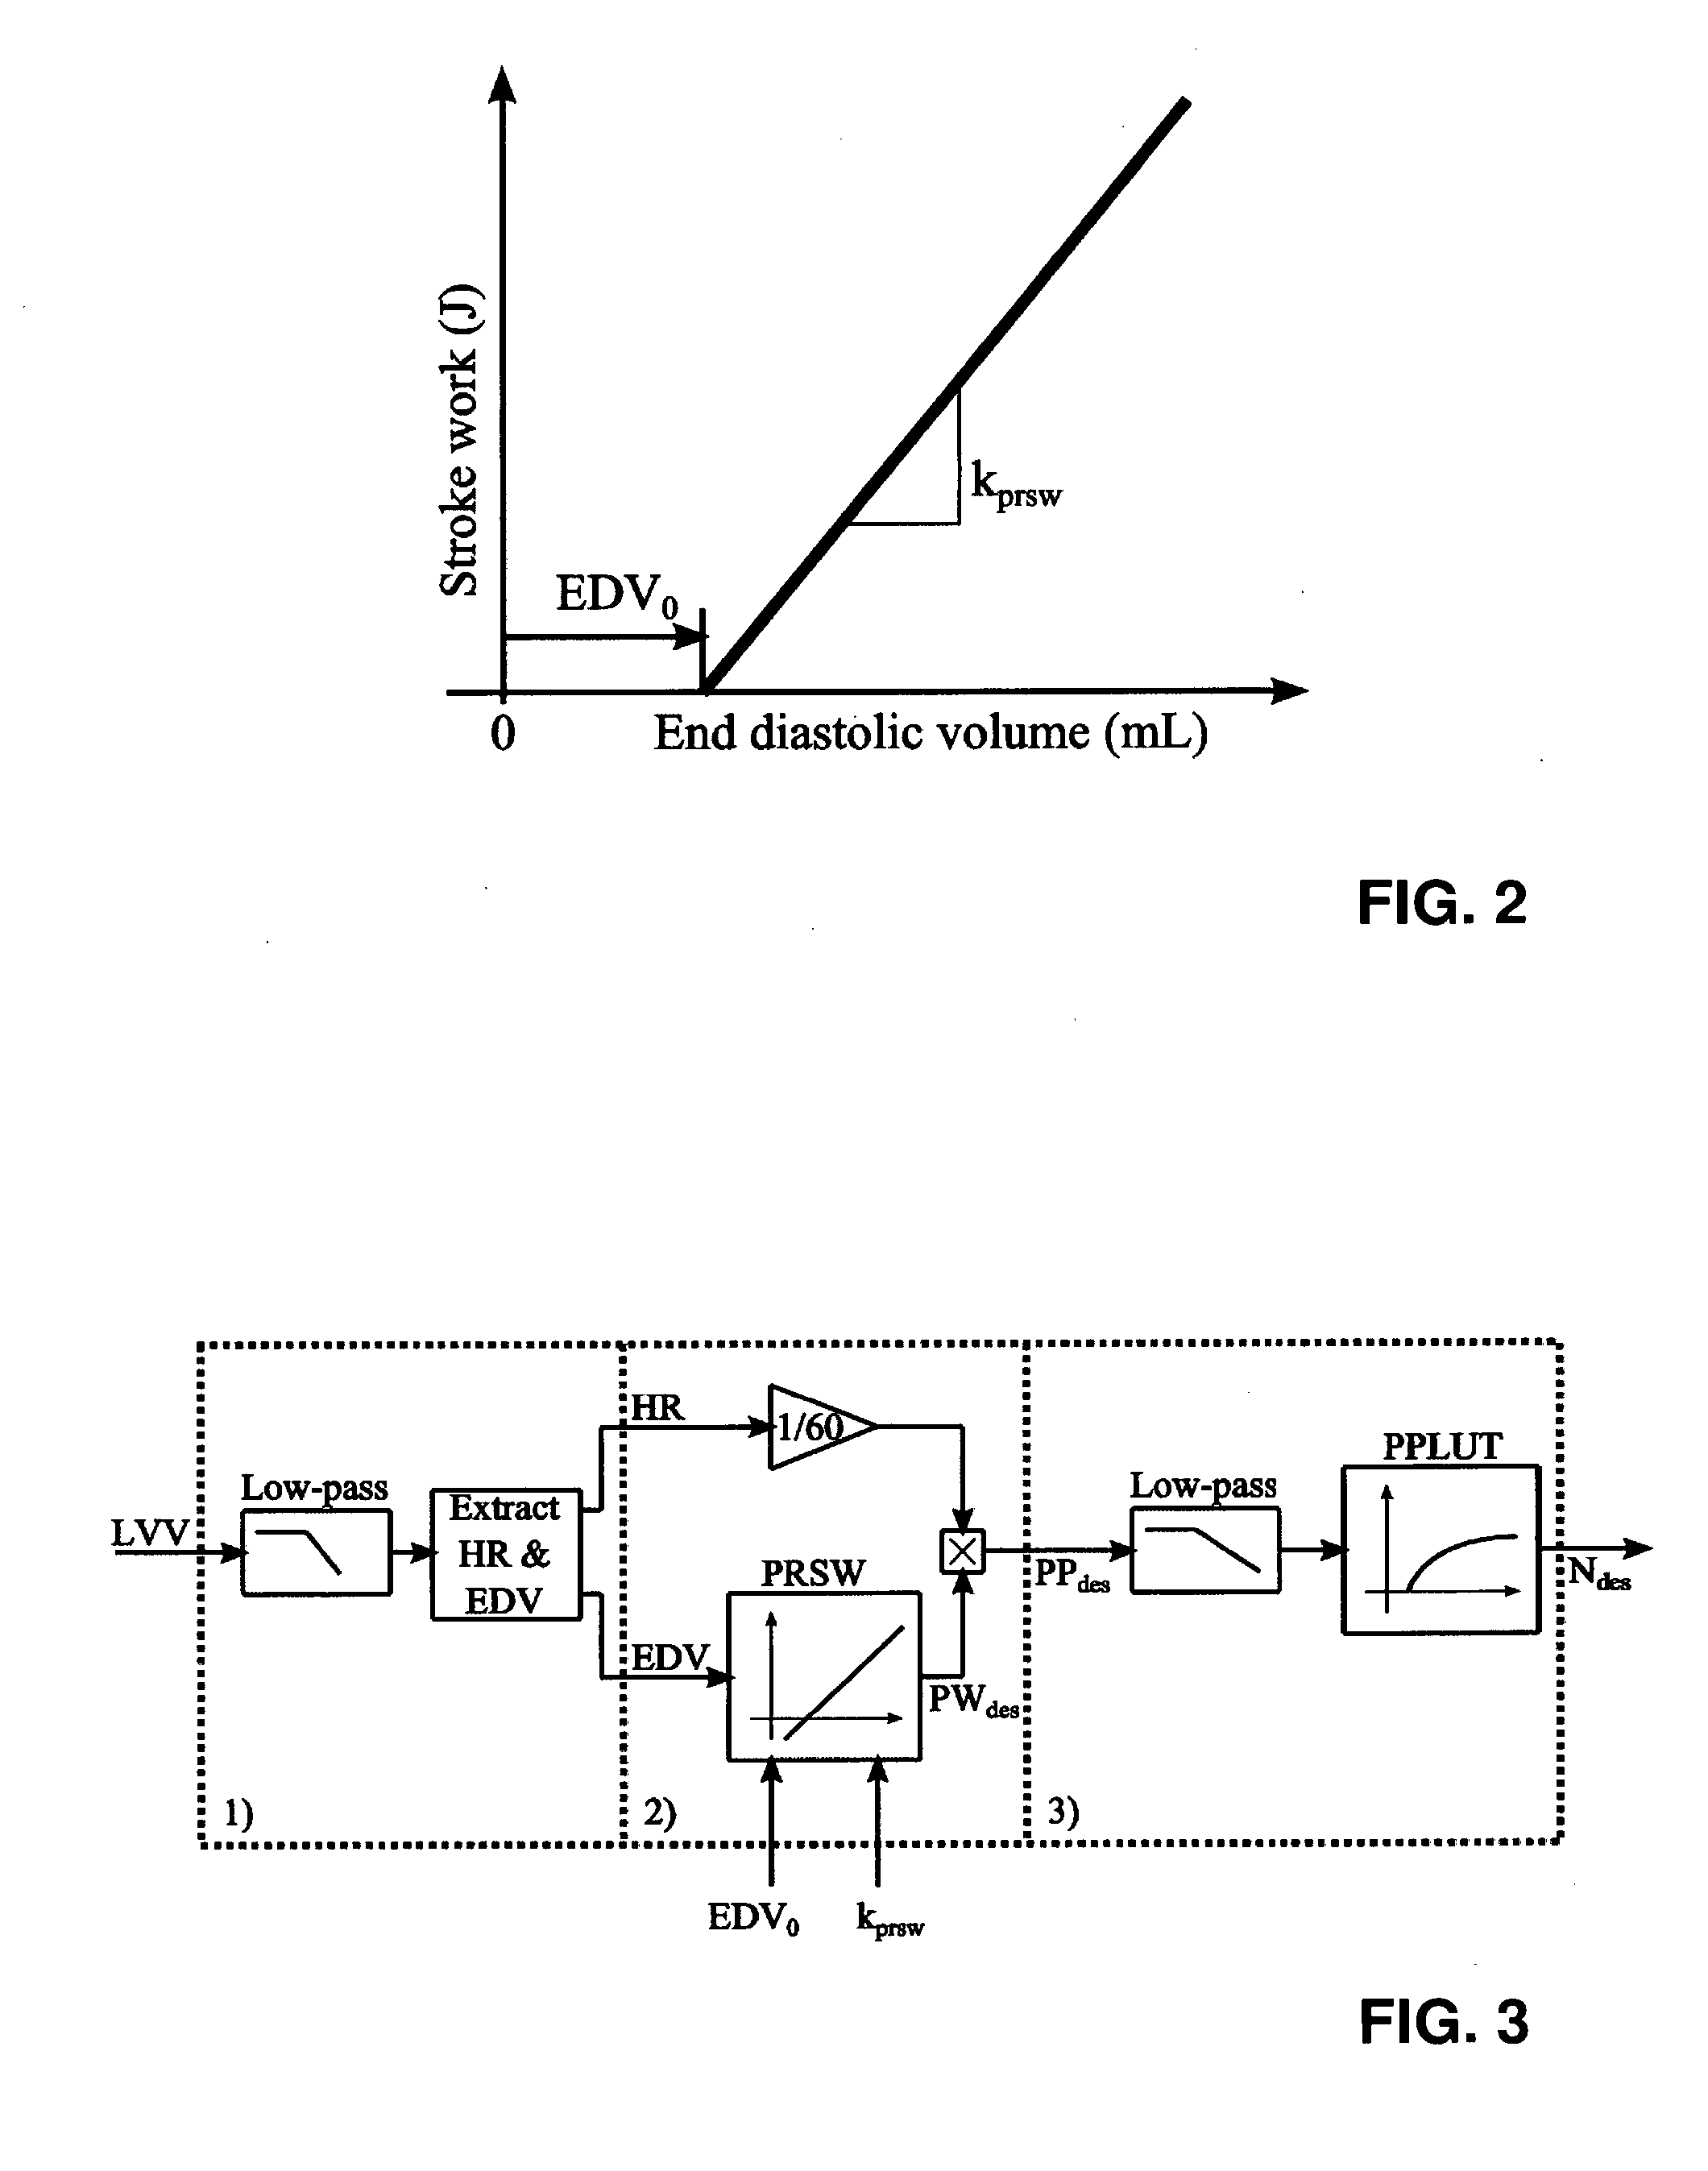 Biomedical Apparatus for Pumping Blood of a Human or an Animal Patient through a Secondary Intra- or Extracorporeal Blood Circuit